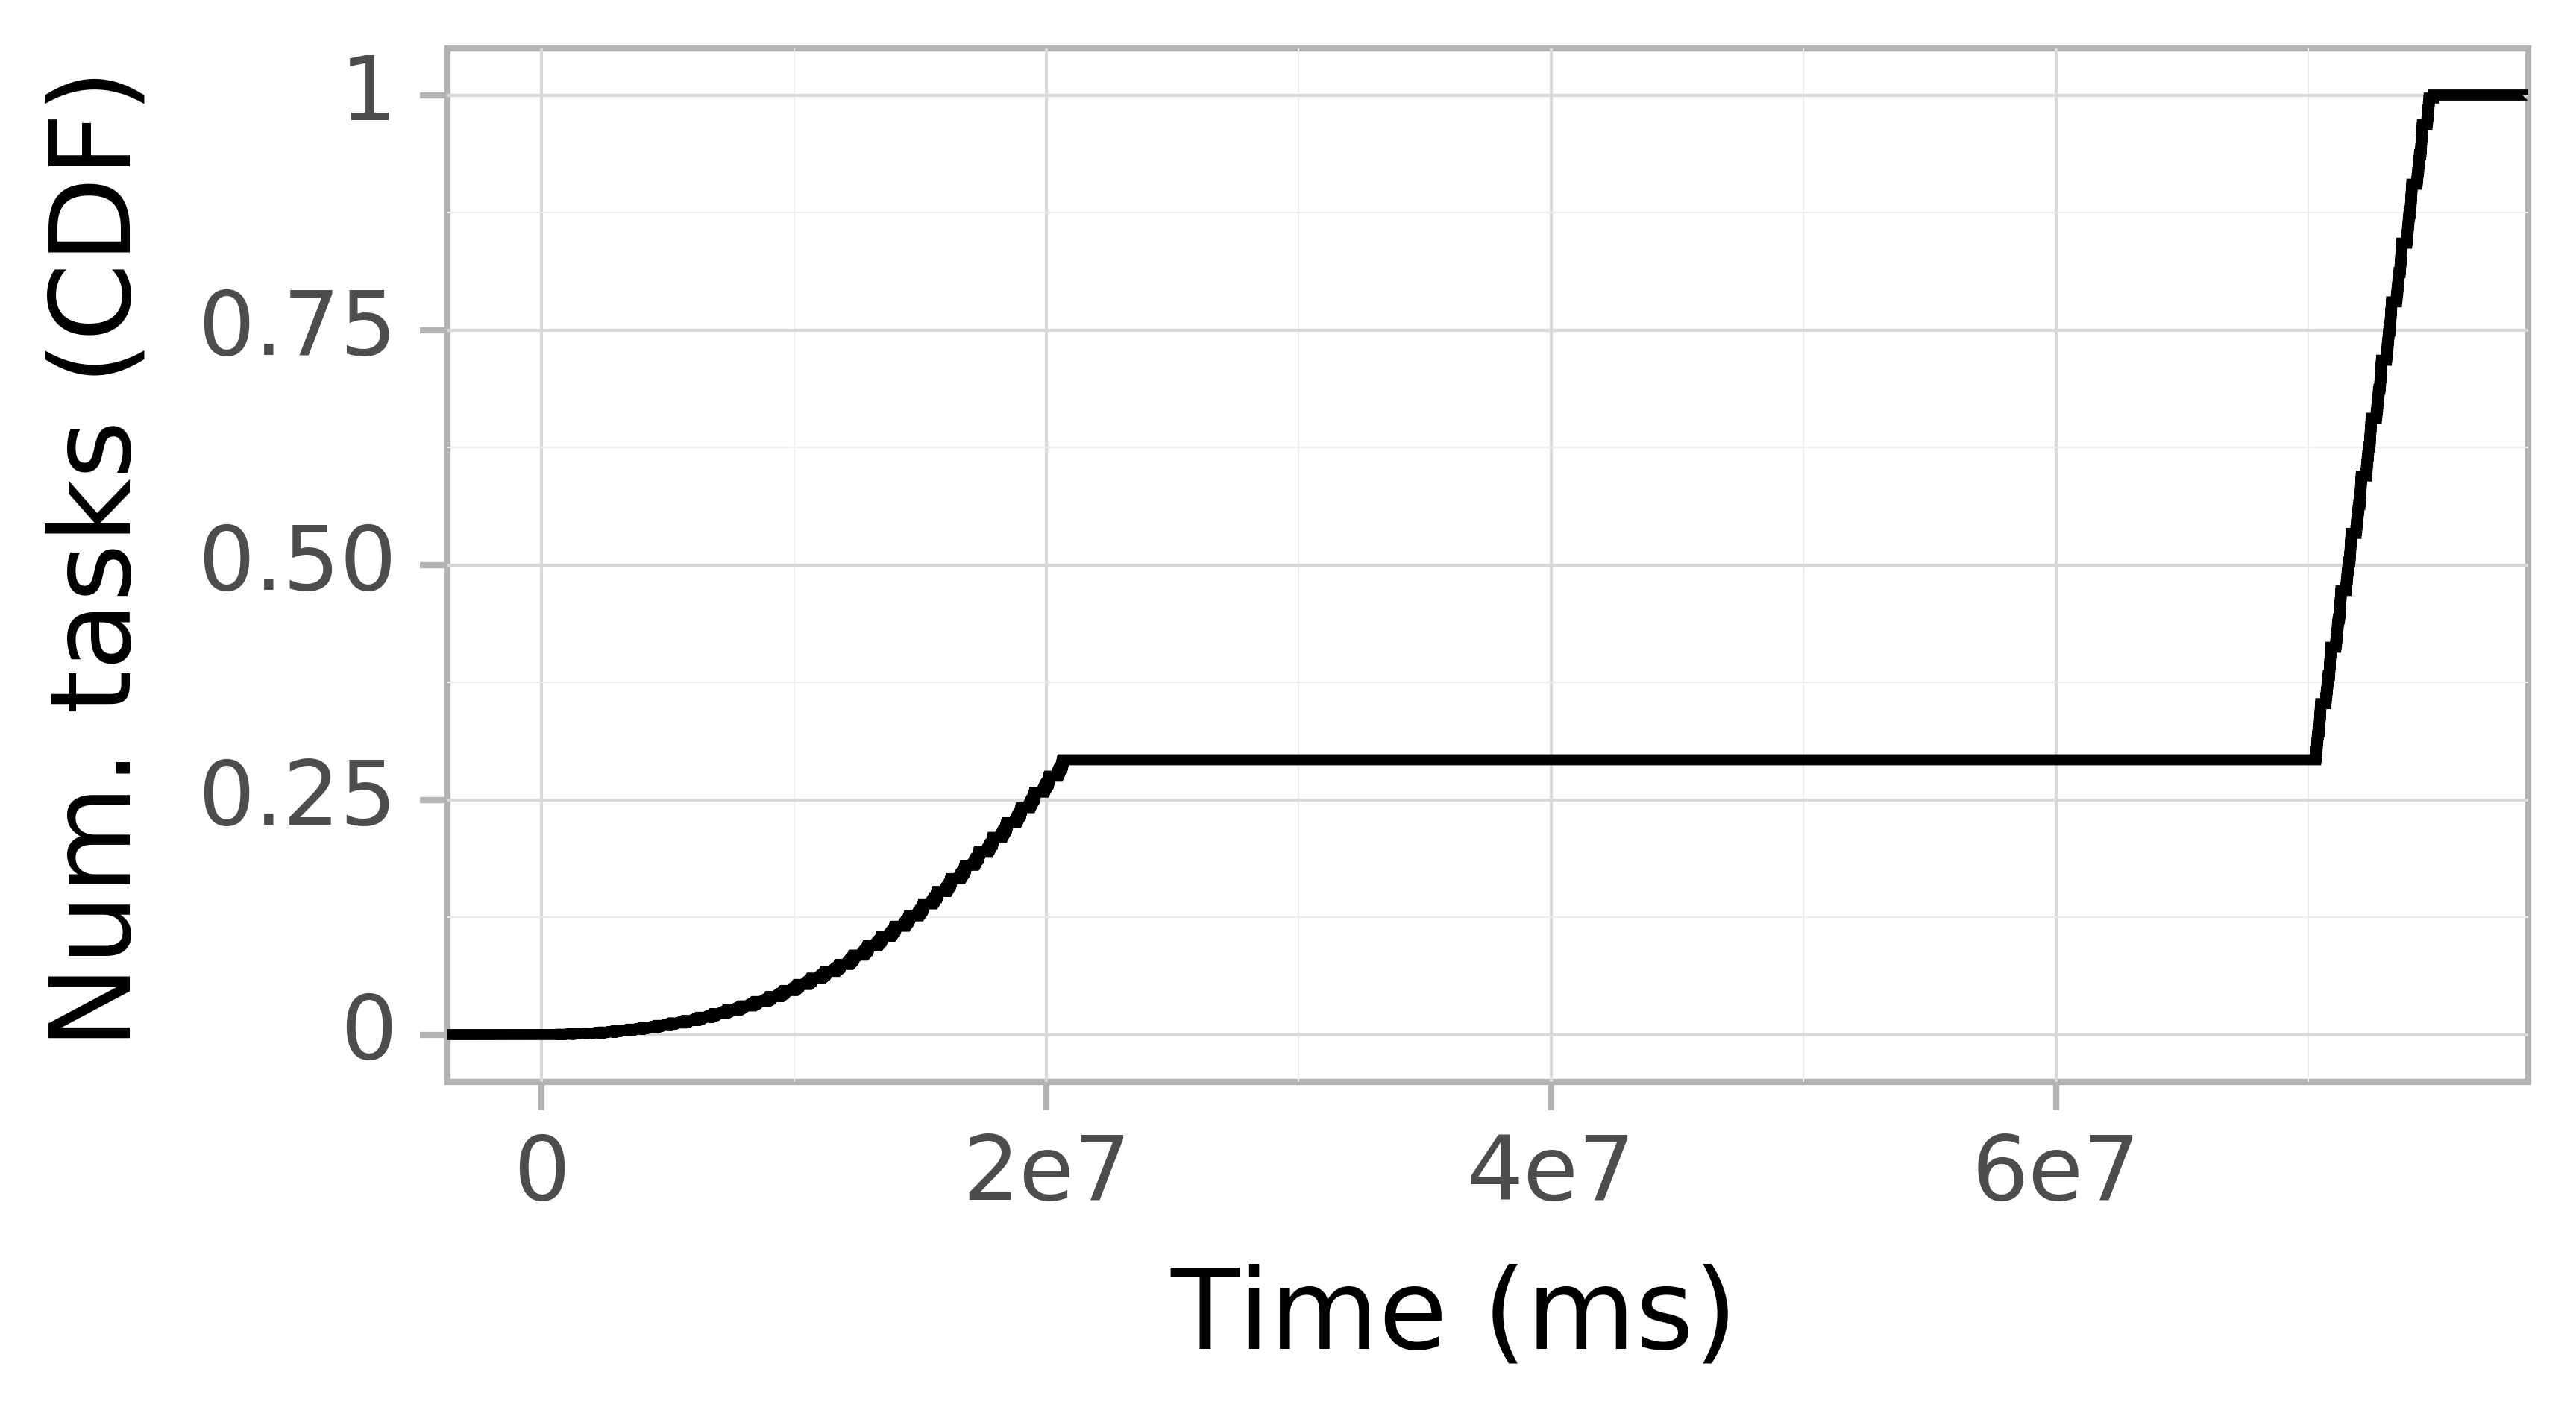 Task arrival CDF graph for the askalon-new_ee52 trace.